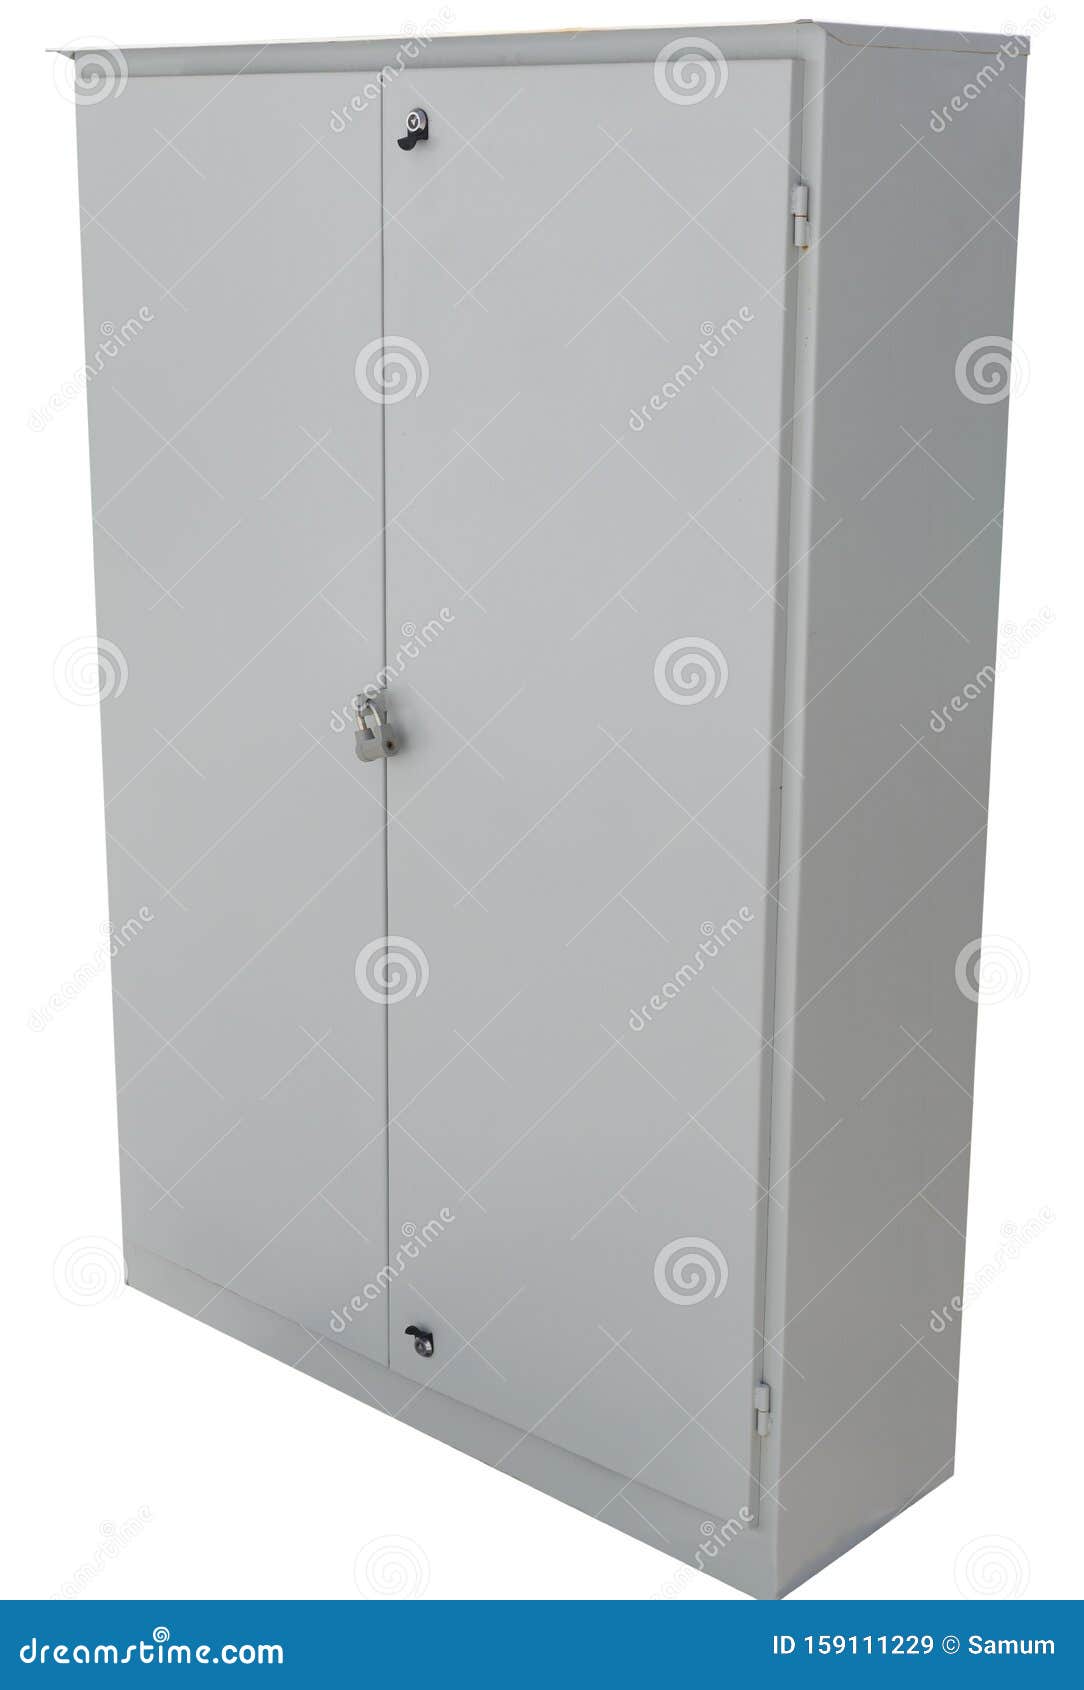 Outdoor Cabinet For Electrical Equipment Stock Image Image Of